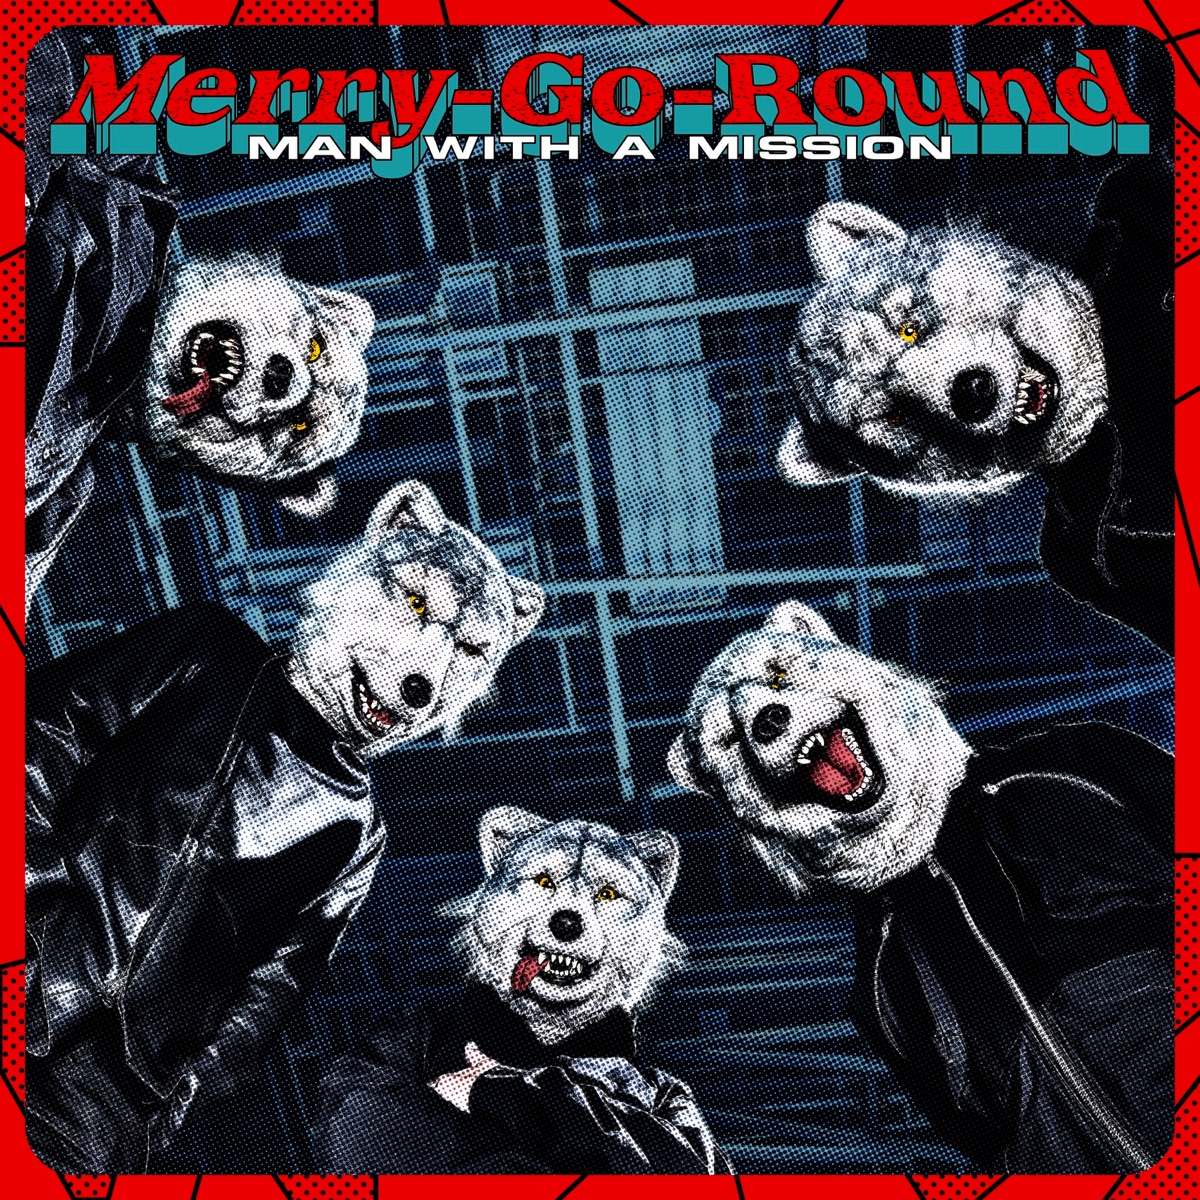 『MAN WITH A MISSION - Break and Cross the Walls』収録の『Break and Cross the Walls Ⅰ』ジャケット